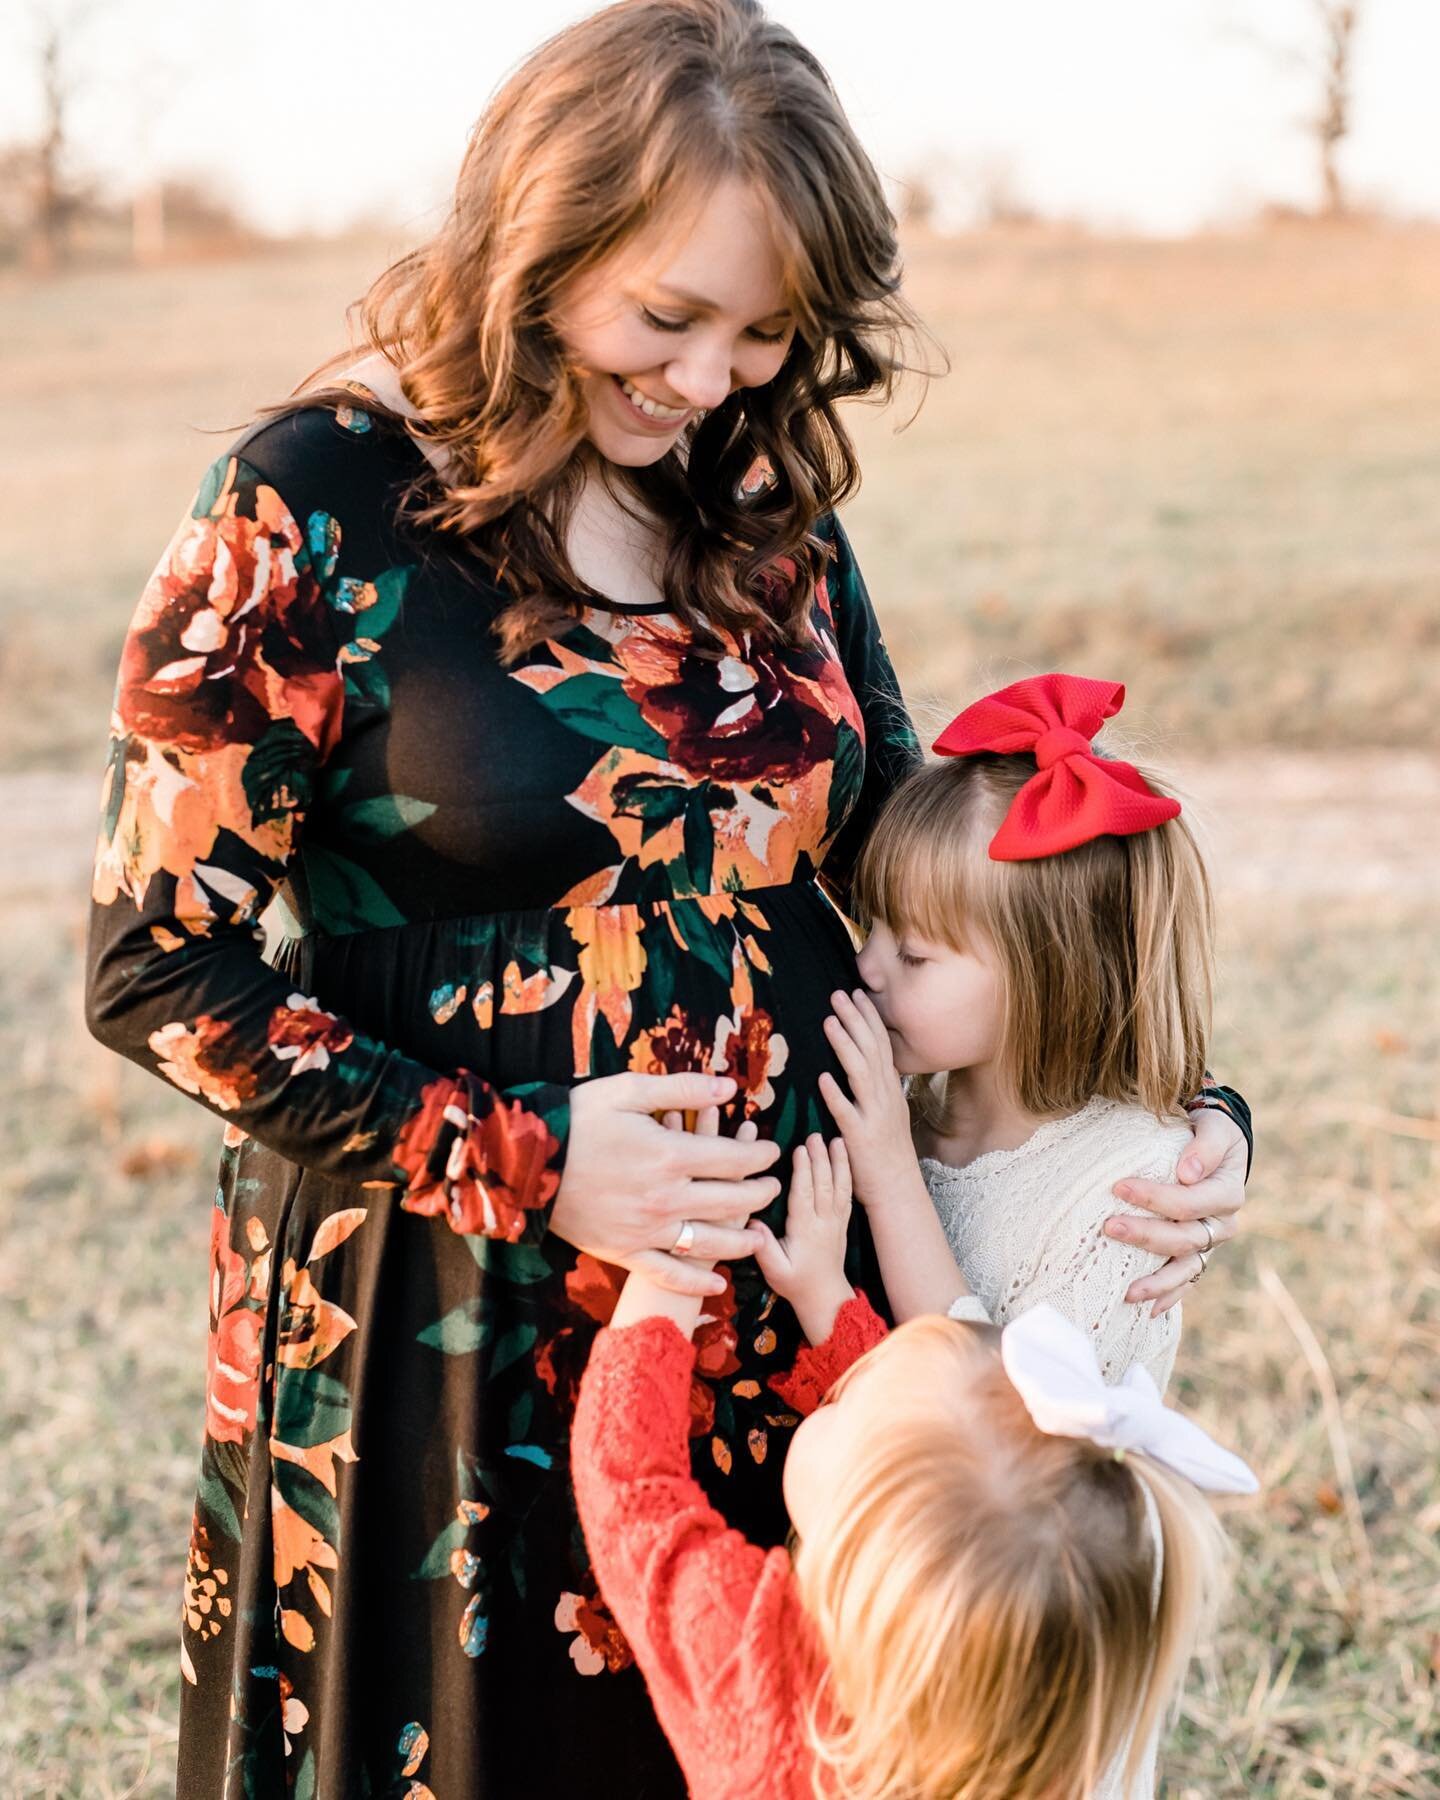 This session last week was such a perfect ending to my Fall Family Sessions for the year! 😍

Now that sessions are wrapped up I&rsquo;m getting the last ones edited and delivered, snowed under with school before finals, and getting crazy ideas to st